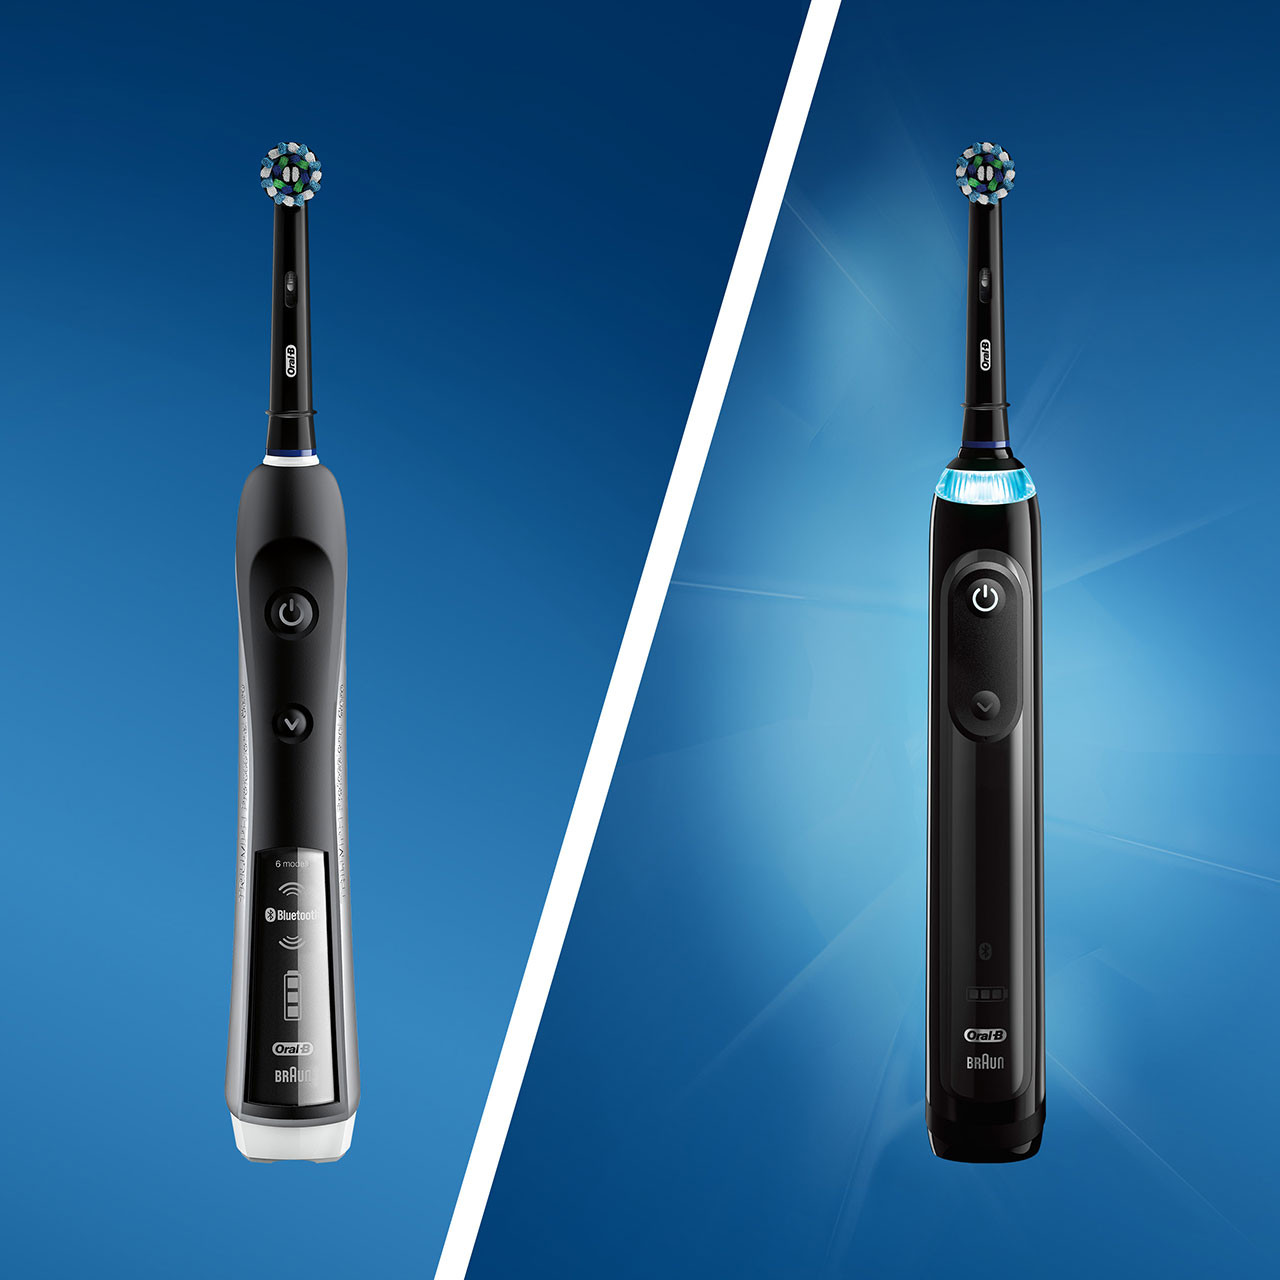 Smart 5000 with Bluetooth Electric Toothbrush